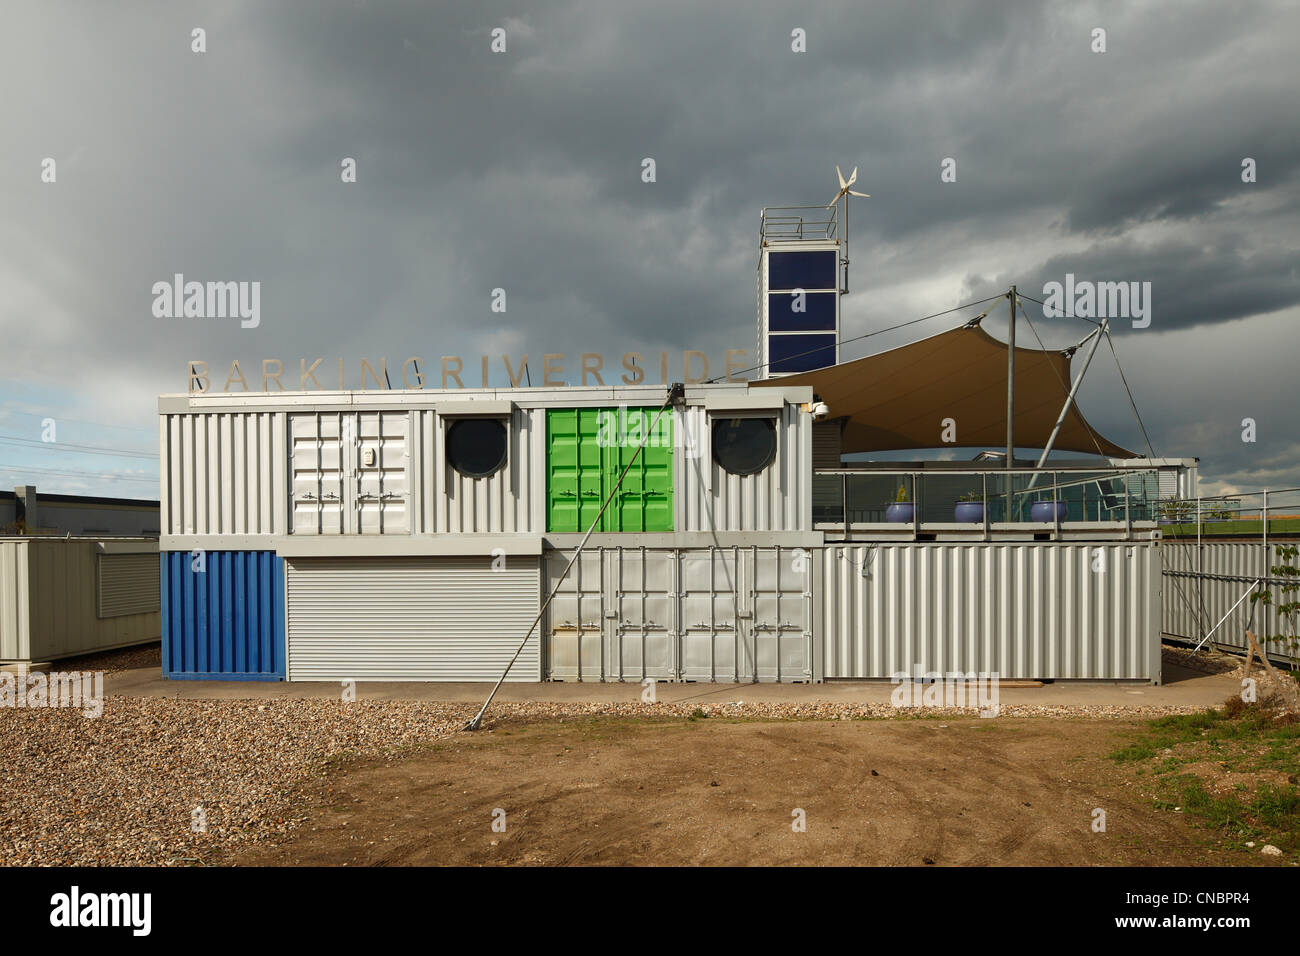 Barking riverside container city. Stock Photo